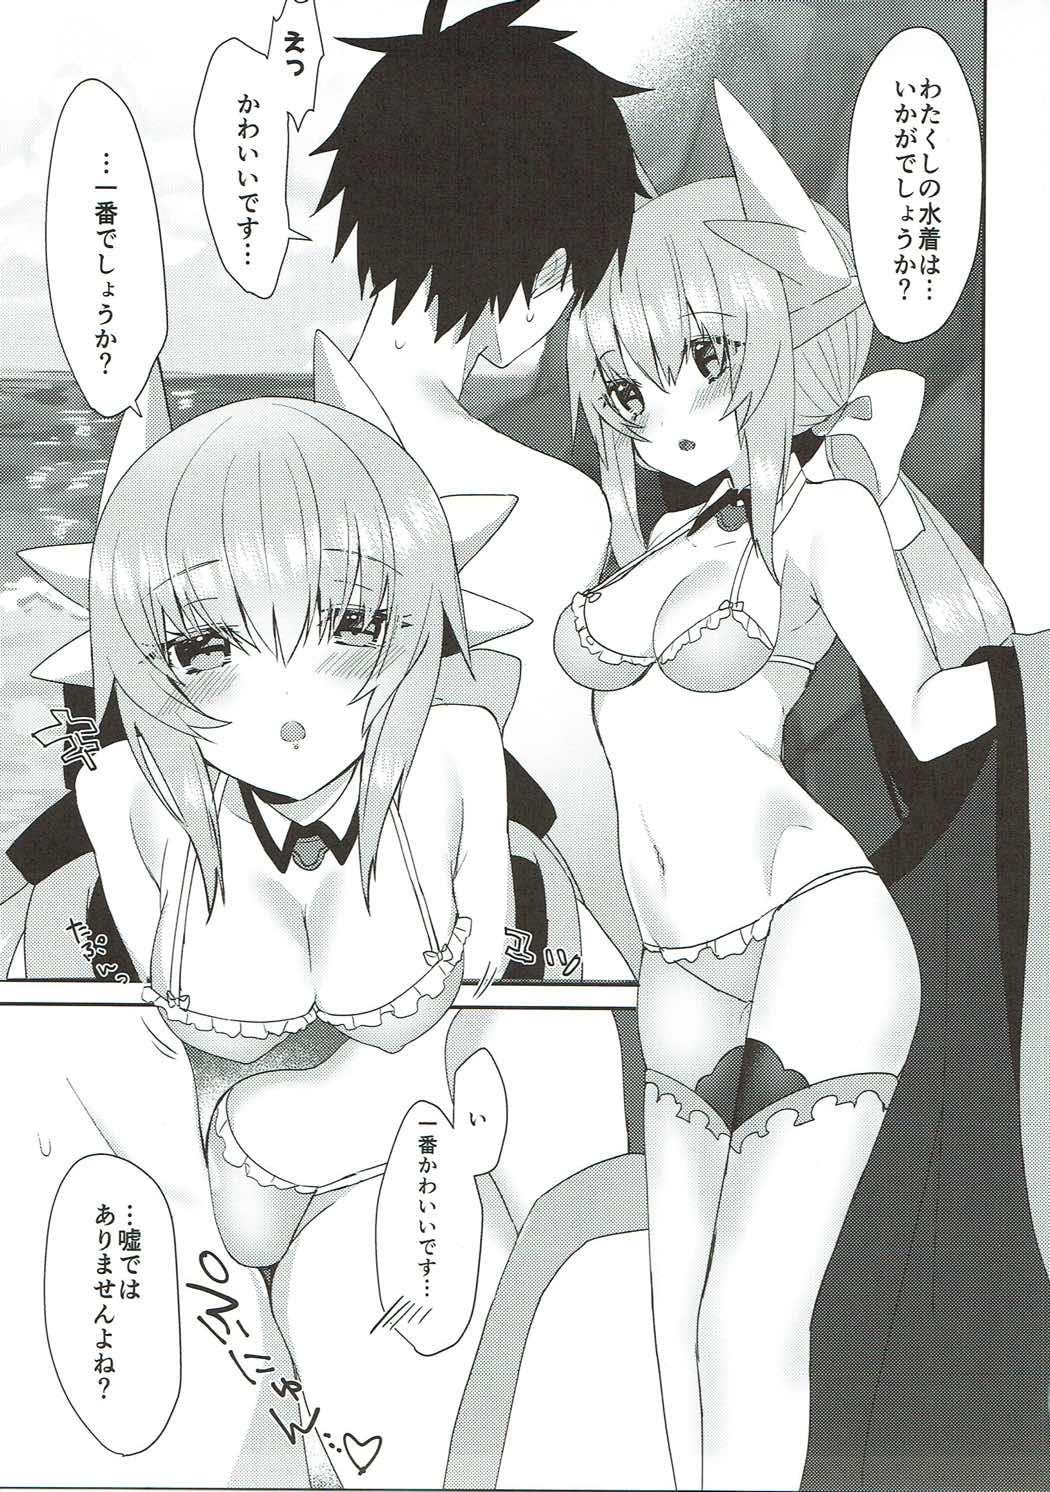 Nylons Kiyohime Summer! - Fate grand order Muscular - Page 6